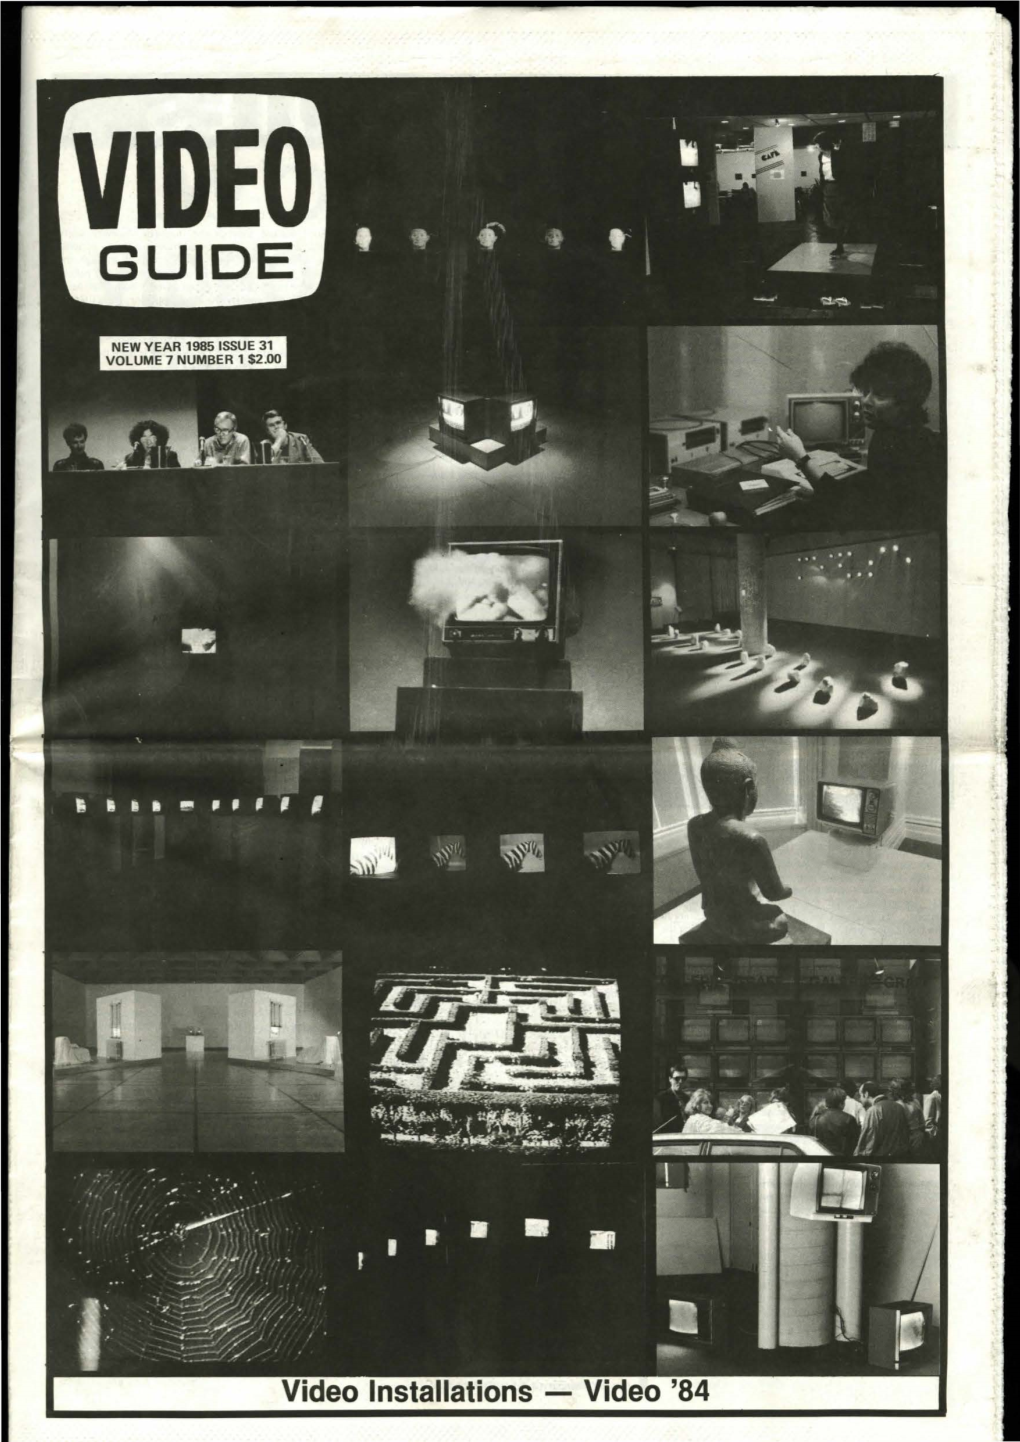 Video Installations - Video '84 HARDWARE NOTES